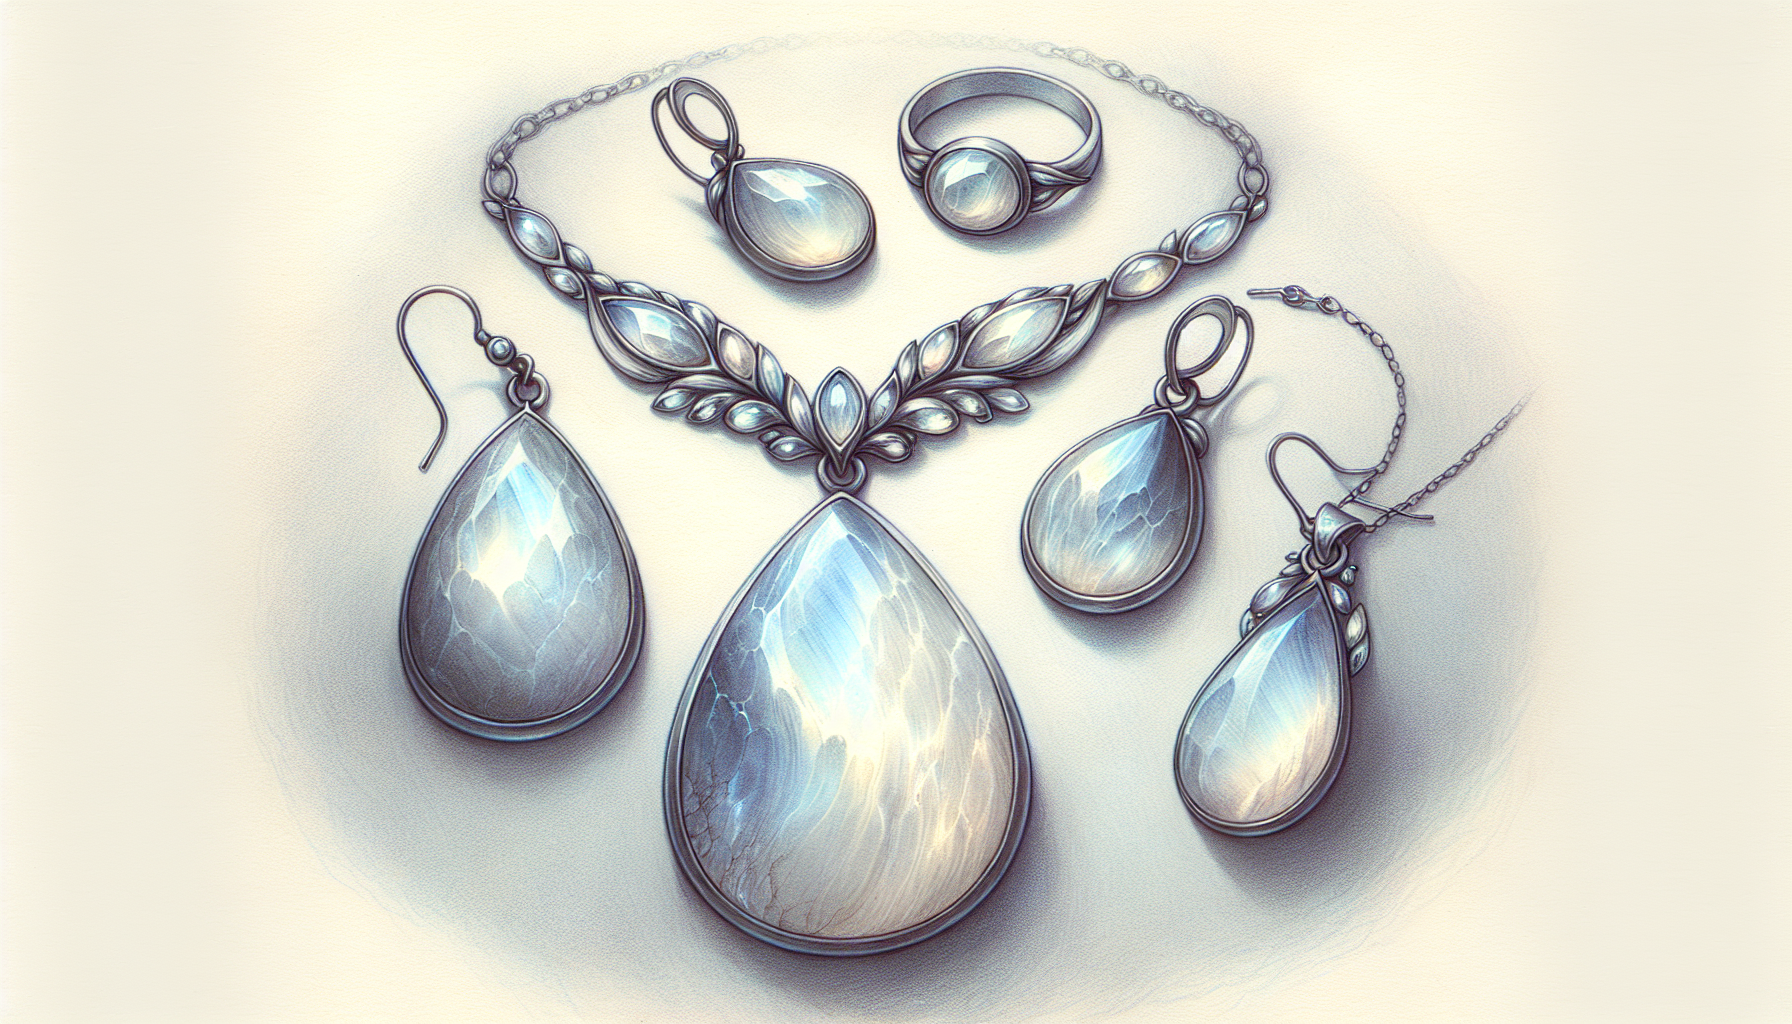 Illustration of elegant moonstone jewelry representing its protective and healing properties